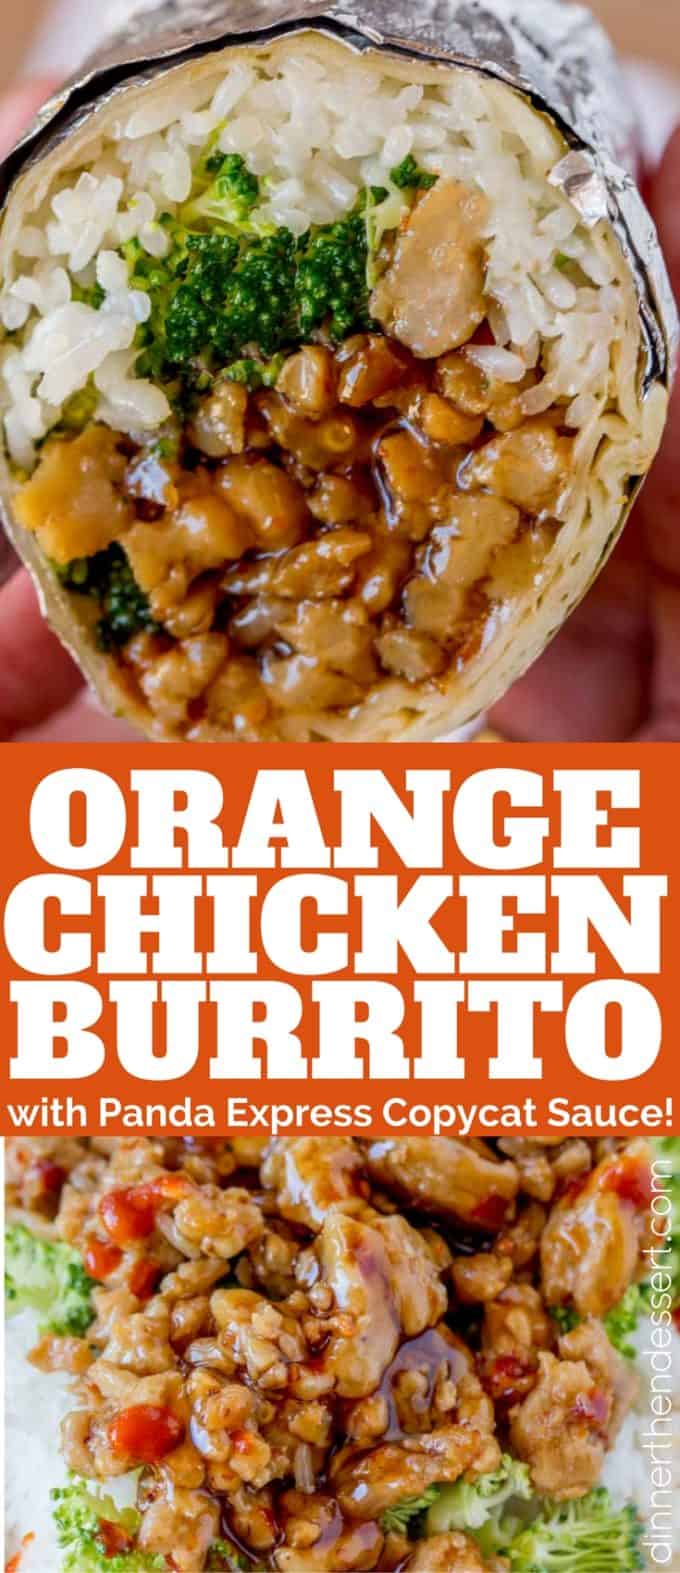 We loved this Orange Chicken Burrito so much we made it twice in one week!